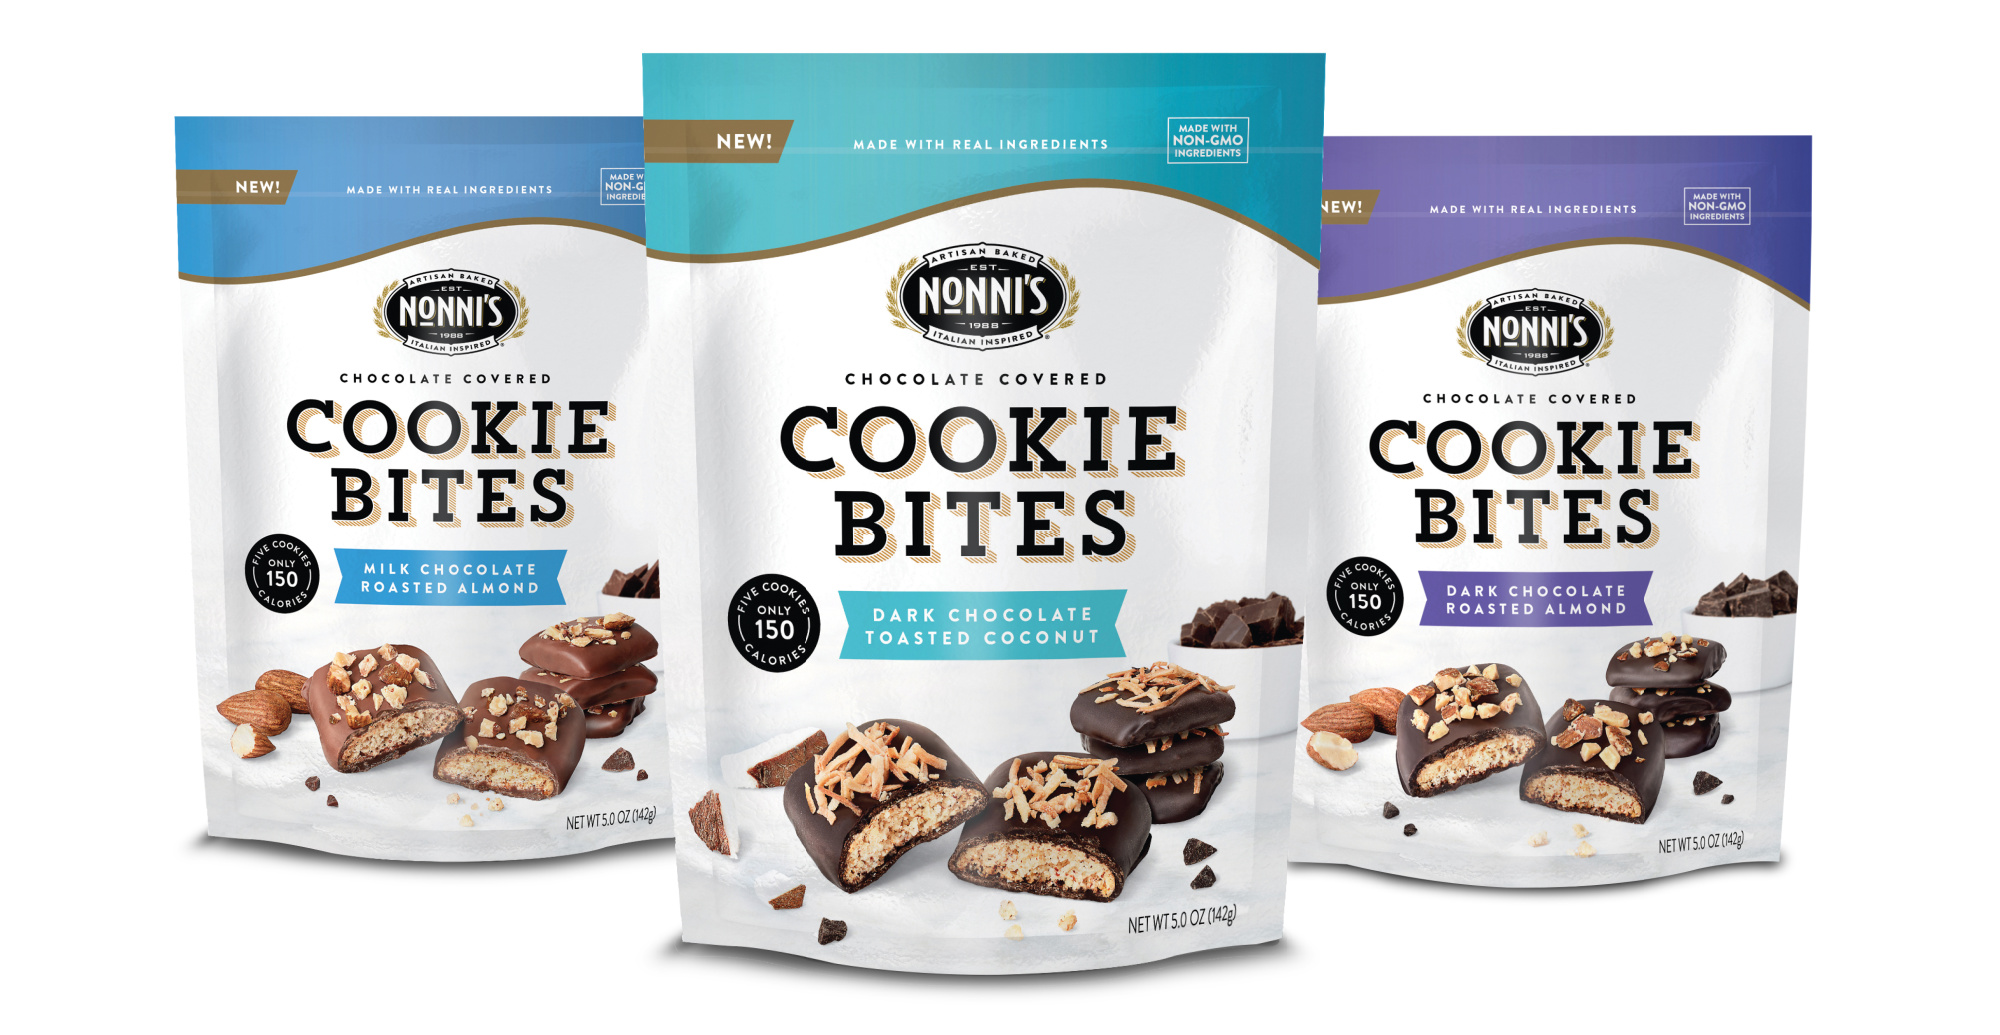 Try NEW Nonni’s Chocolate Covered Cookie Bites - Save Now At Publix on I Heart Publix 2